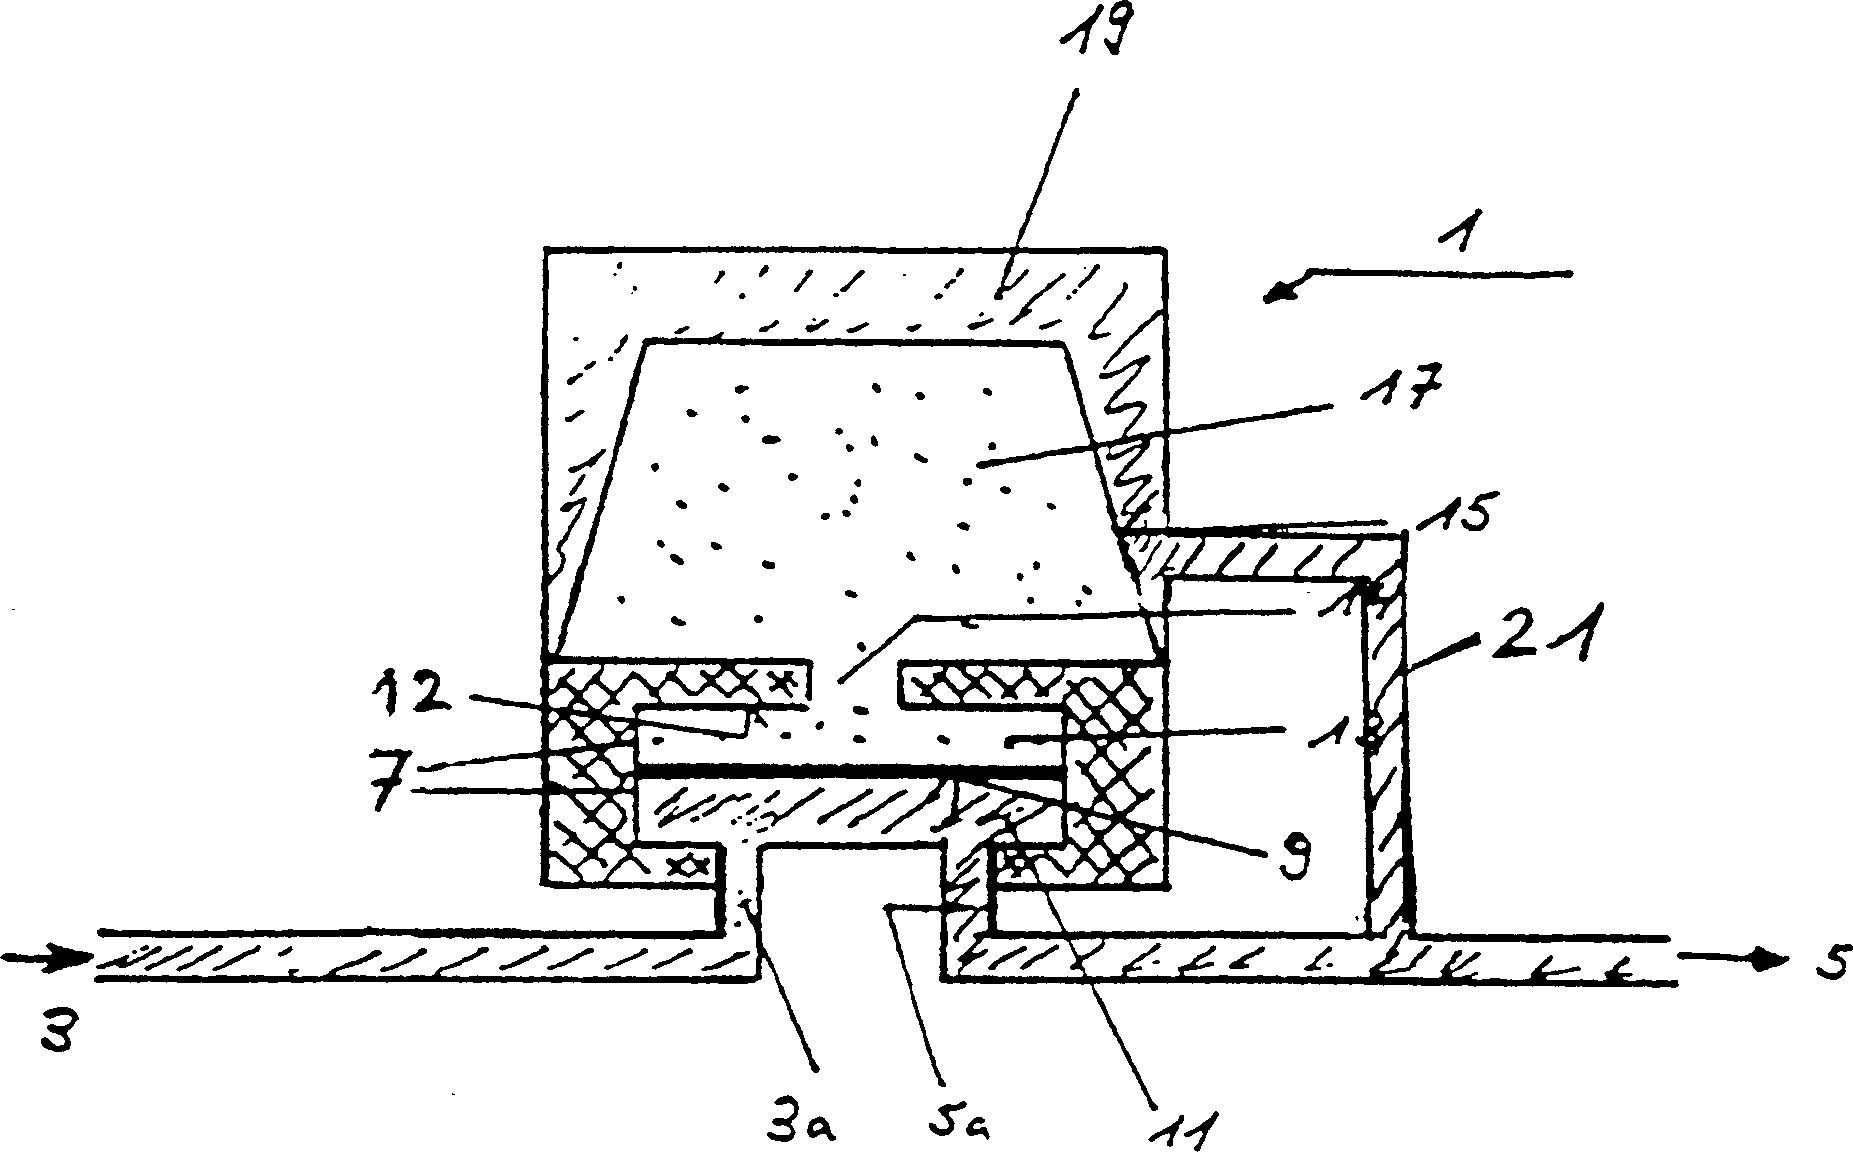 Device for reducing pressure pulsations in hydraulic manifolds